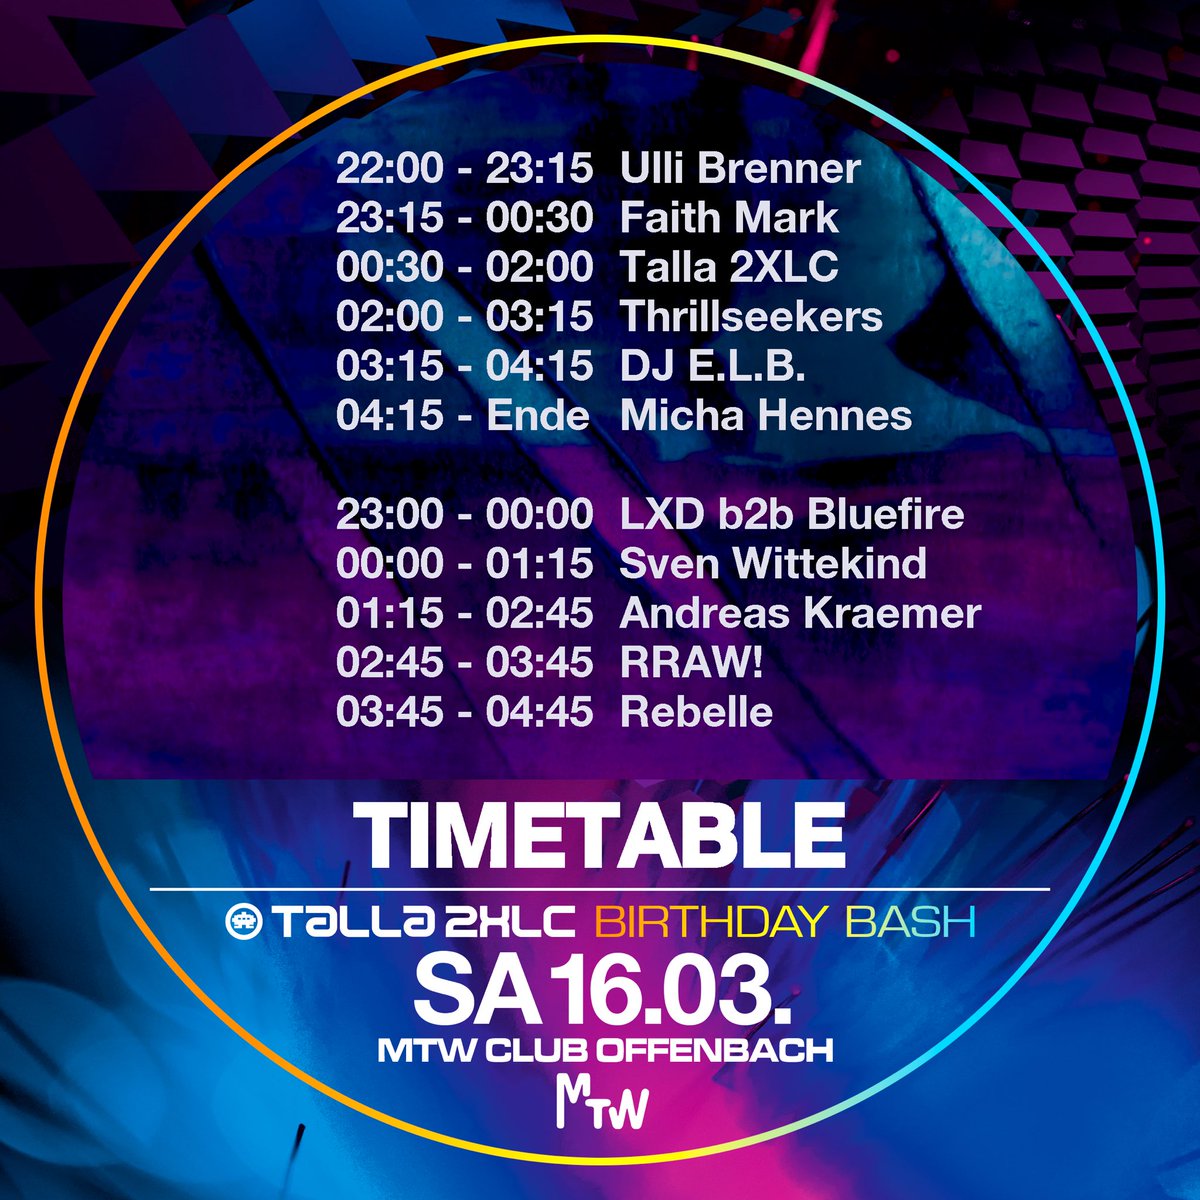 The time has come. See you tonight at @clubmtw • Abendkasse offen ab 22 uhr • 11 djs on 2 floors • mainfloor: trance & classix • floor 2: Peak time techno • #talla2xlc #thethrillseekers #andreaskraemer #svenwittekind #ullibrenner #faithmarkmusic and more.